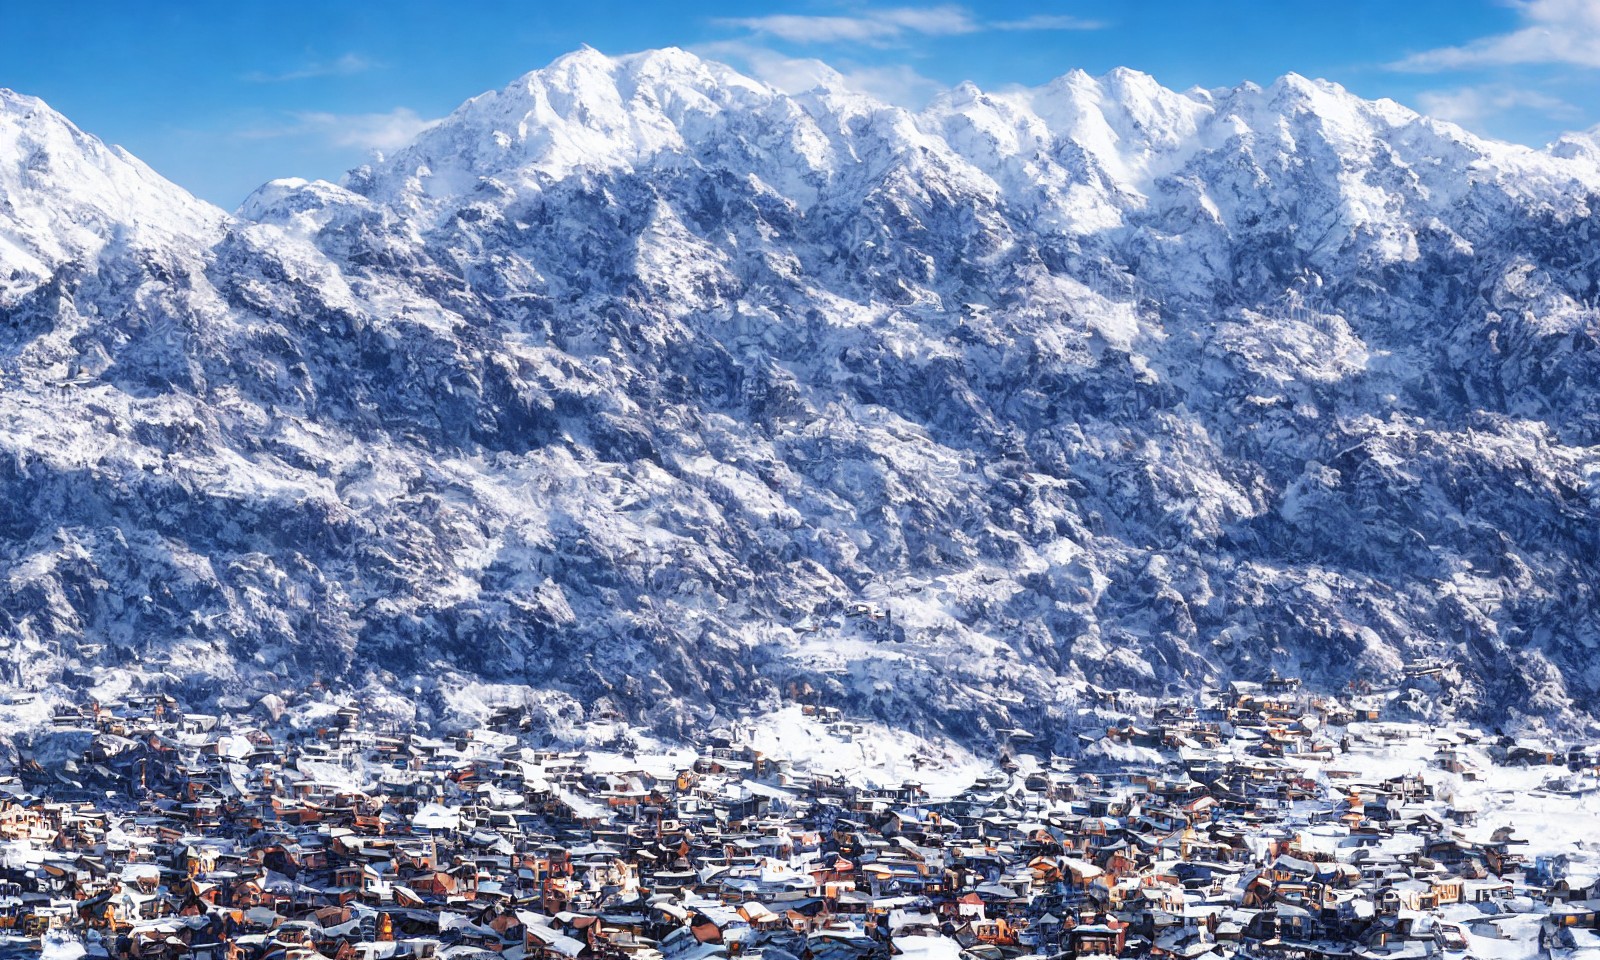 Spectacular small villages beneath high snow-capped mountains